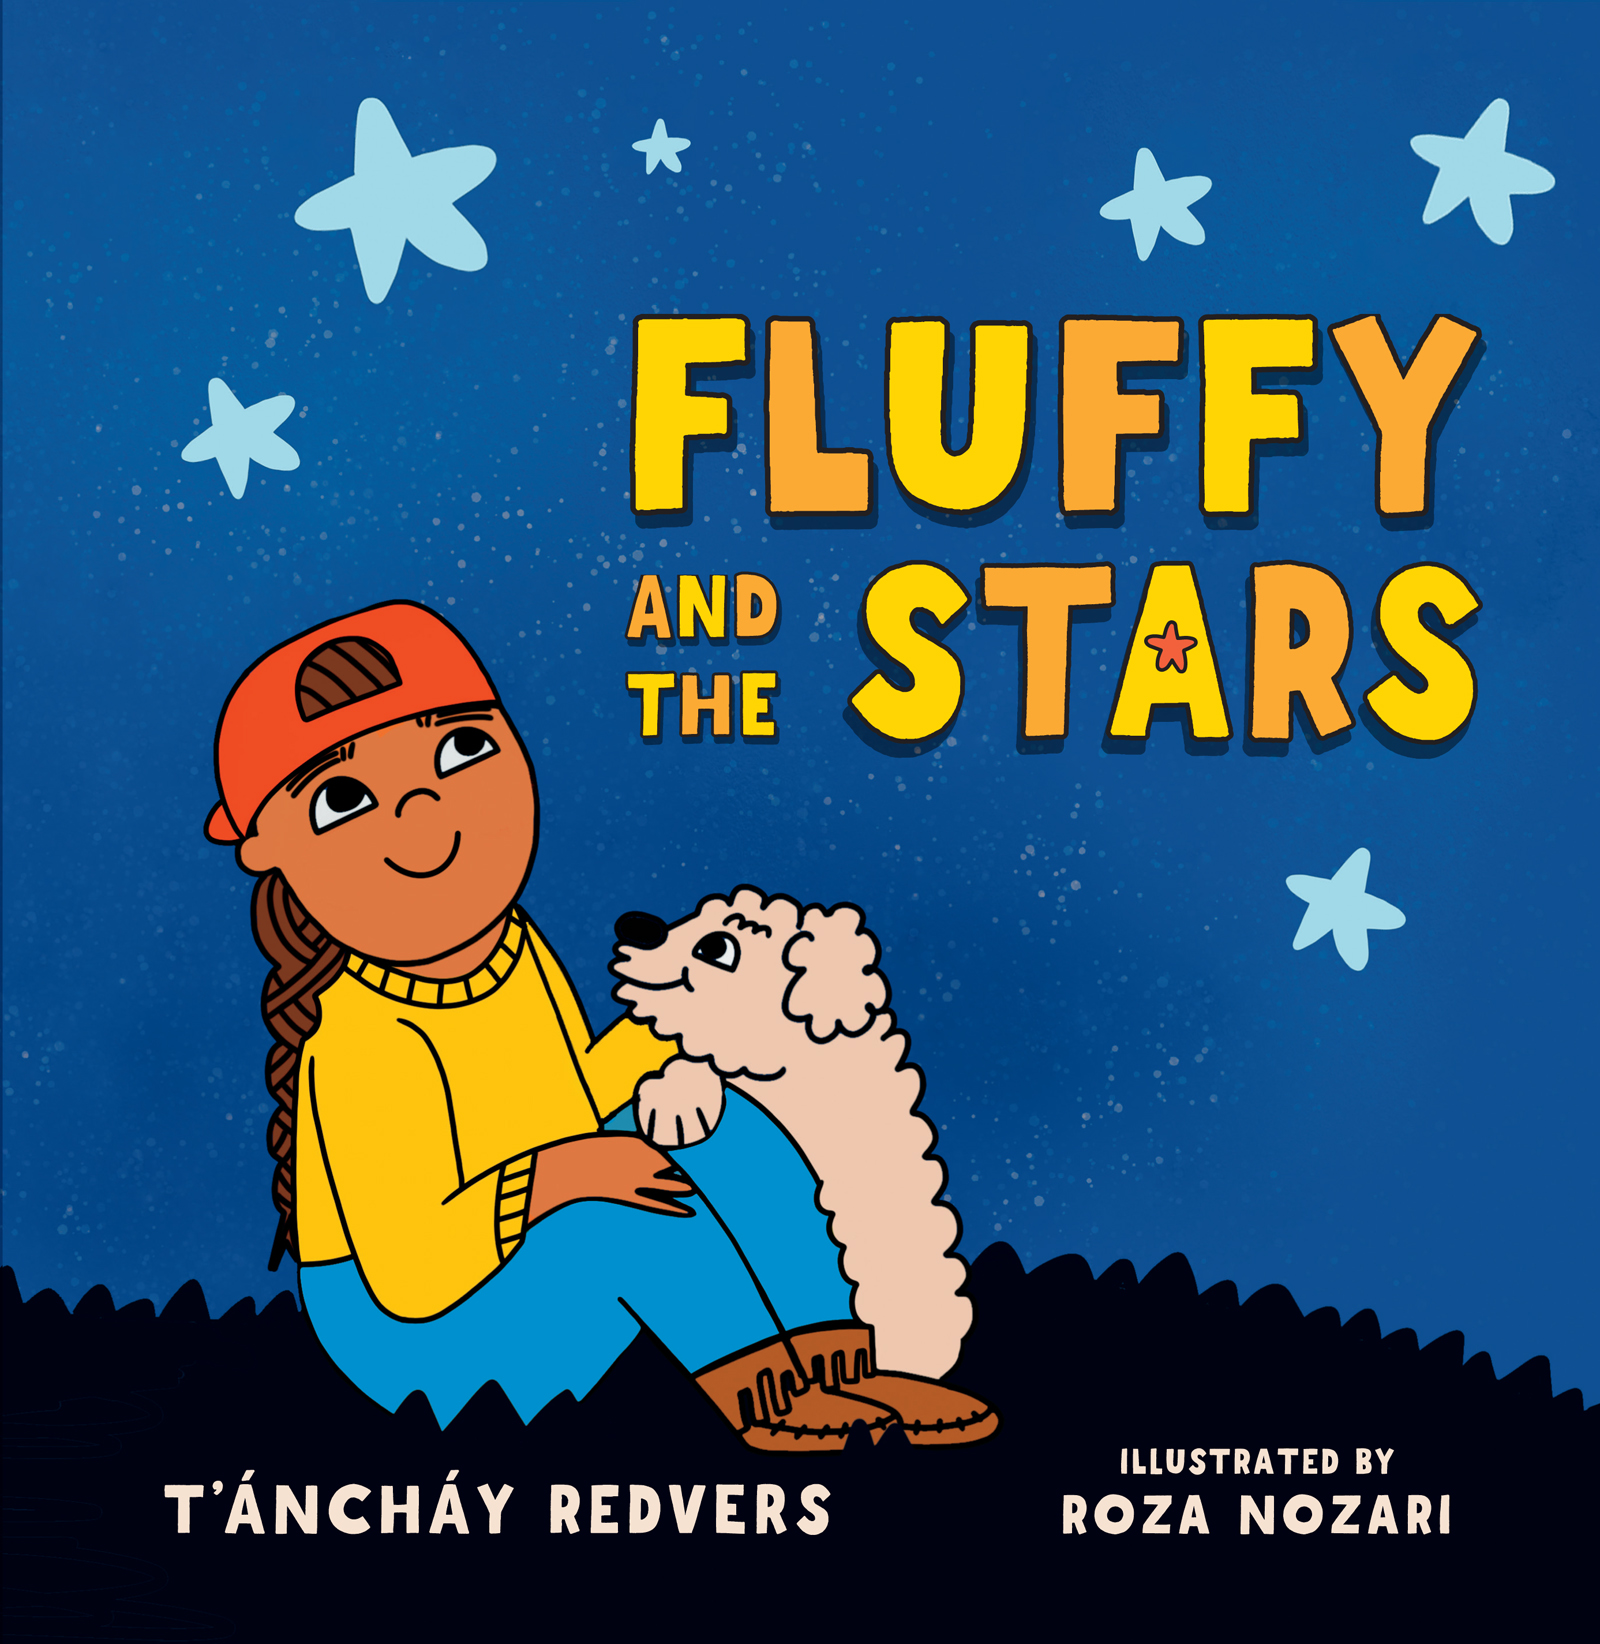 Fluffy and the Stars